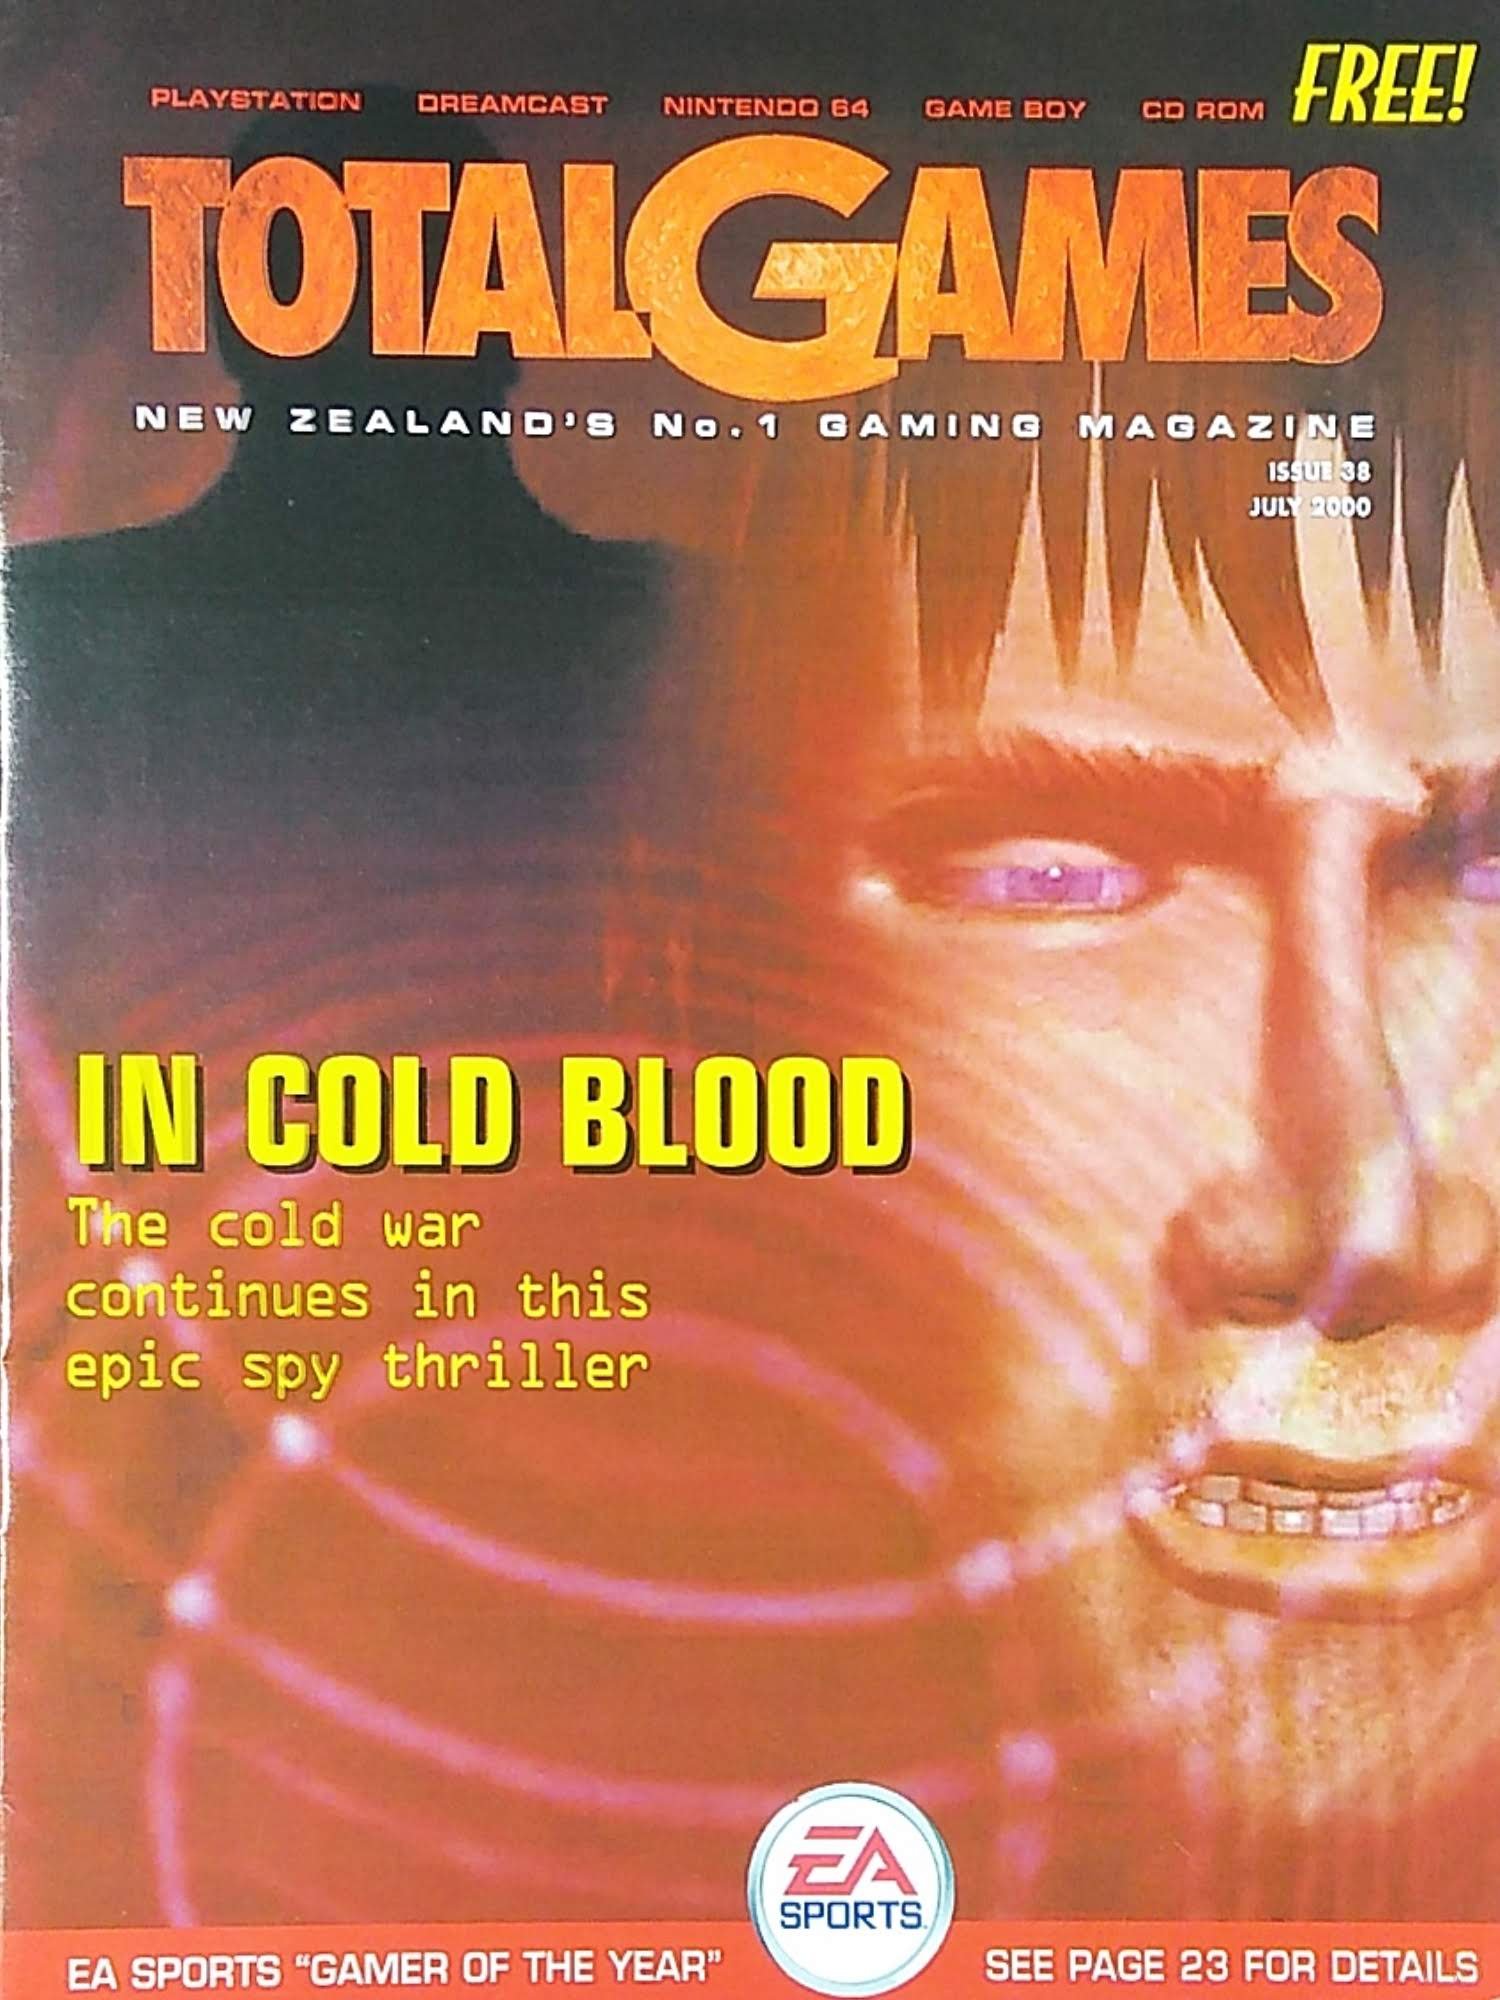 Total Games Issue 38 (July 2000)